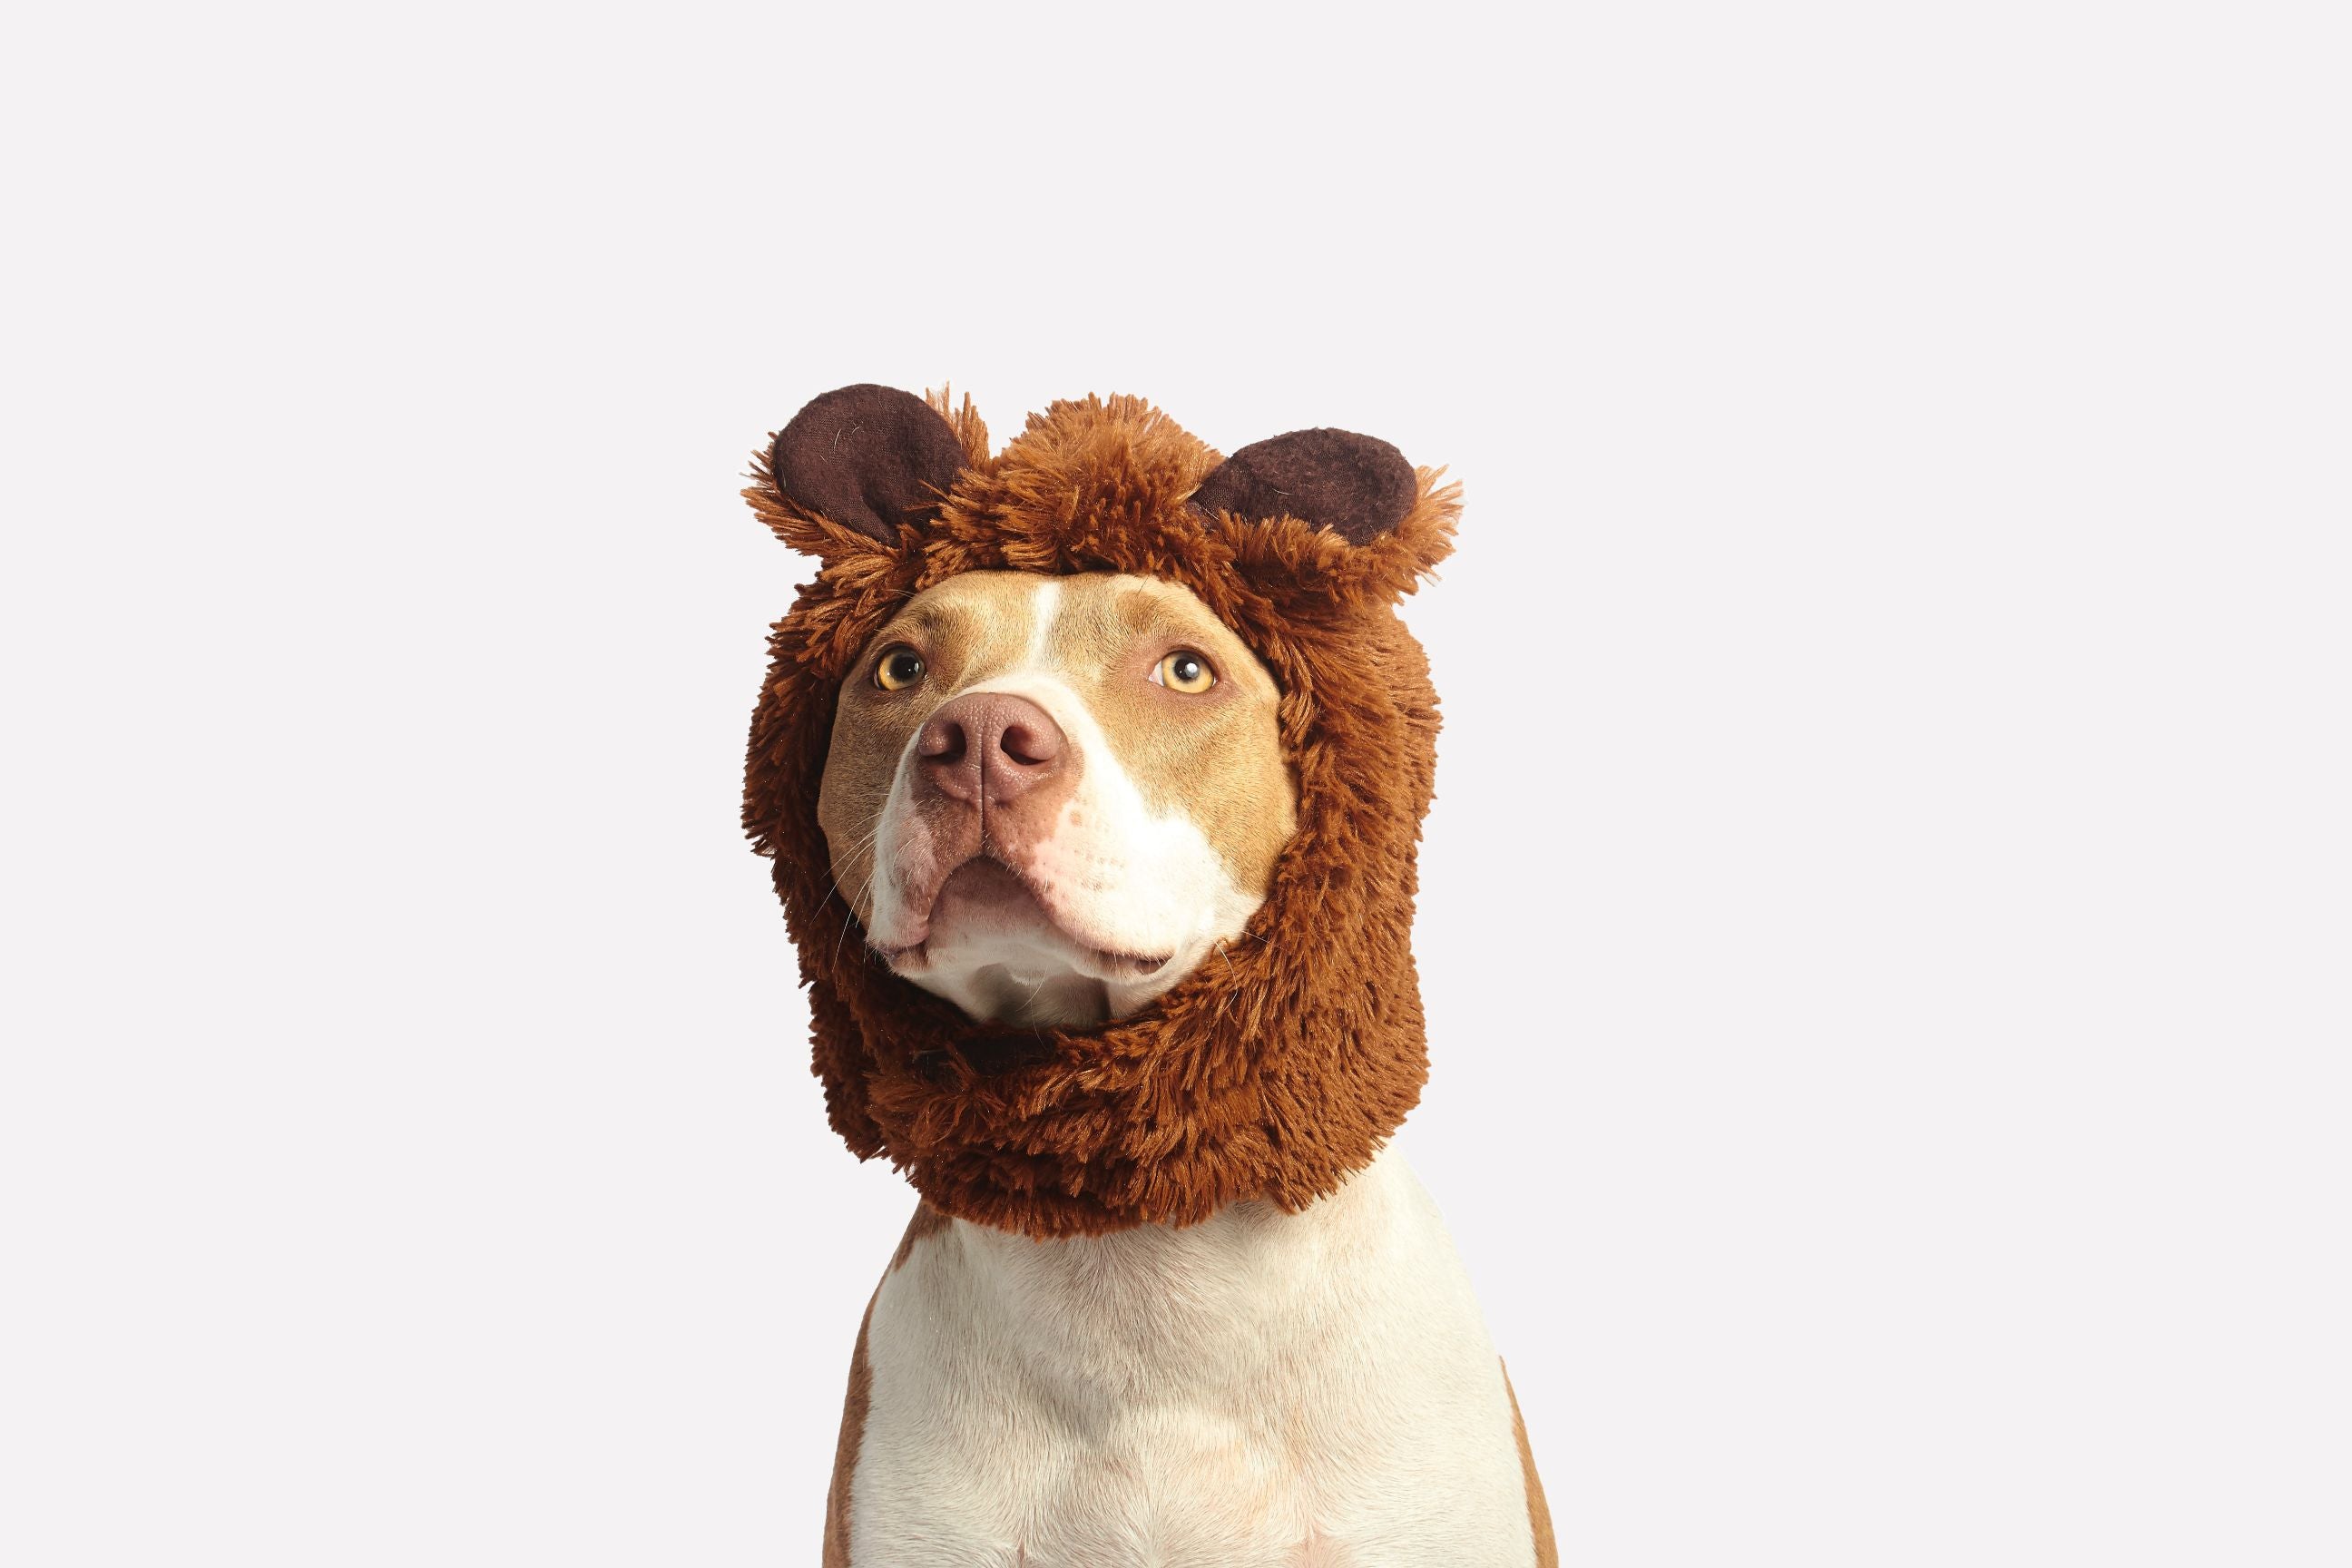 15 Best Dog Halloween Costume Ideas for a Pawsome Trick or Treat